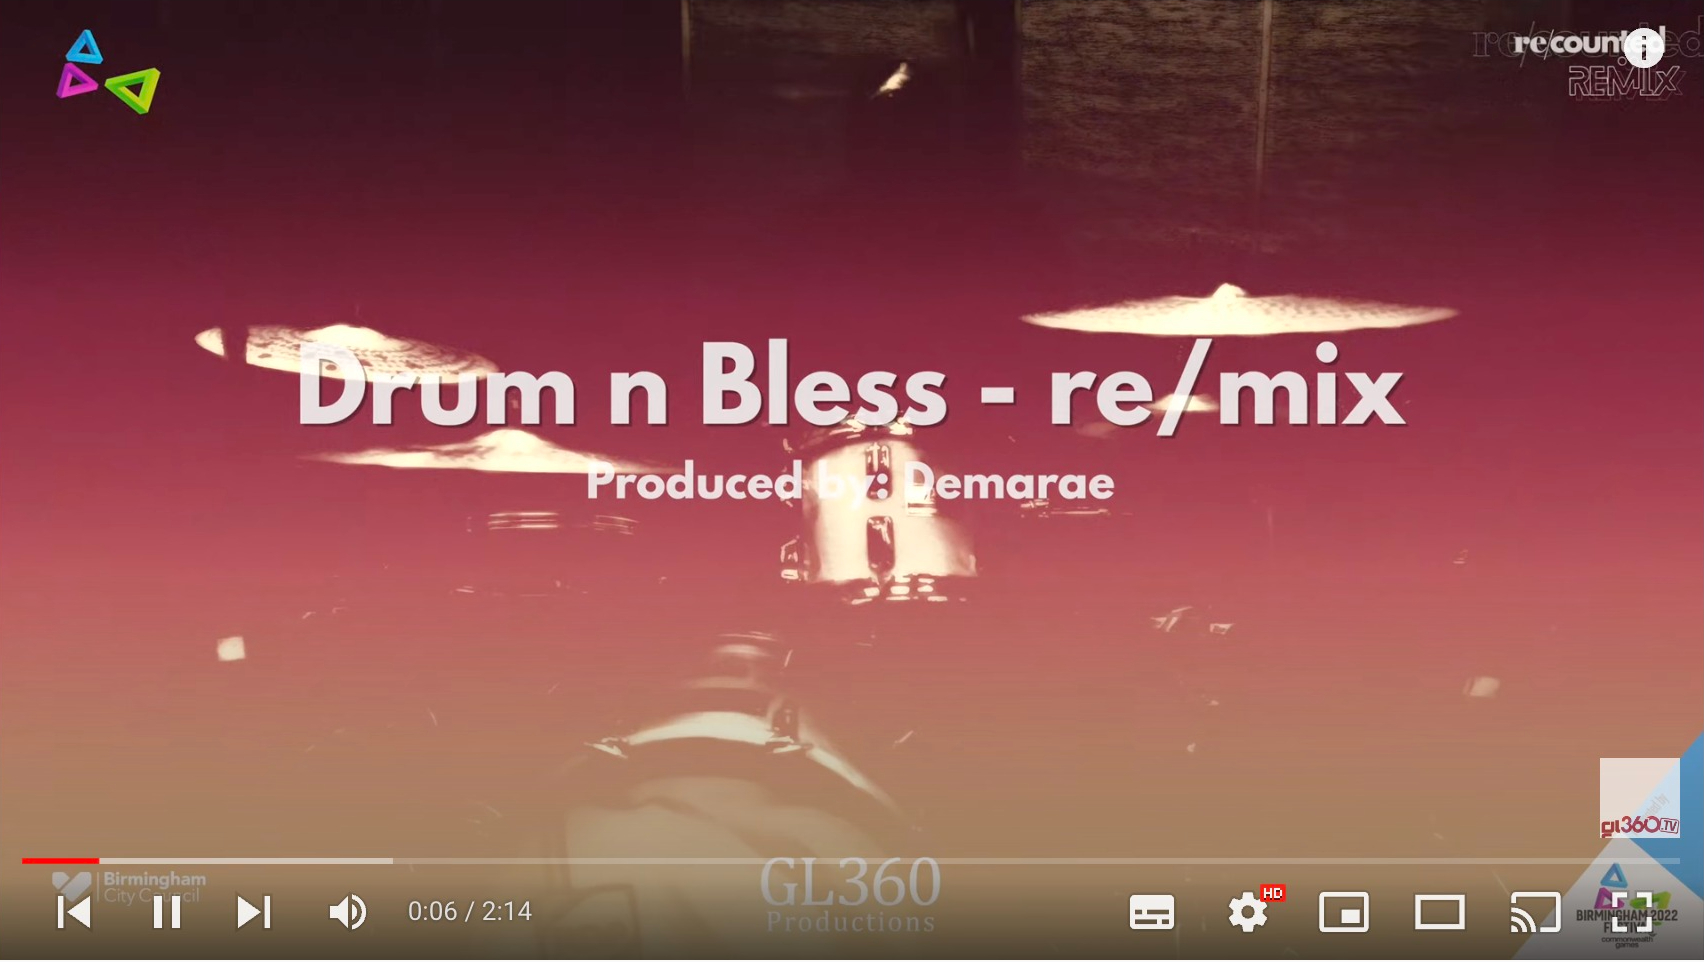 Drum n Bless - re/mix